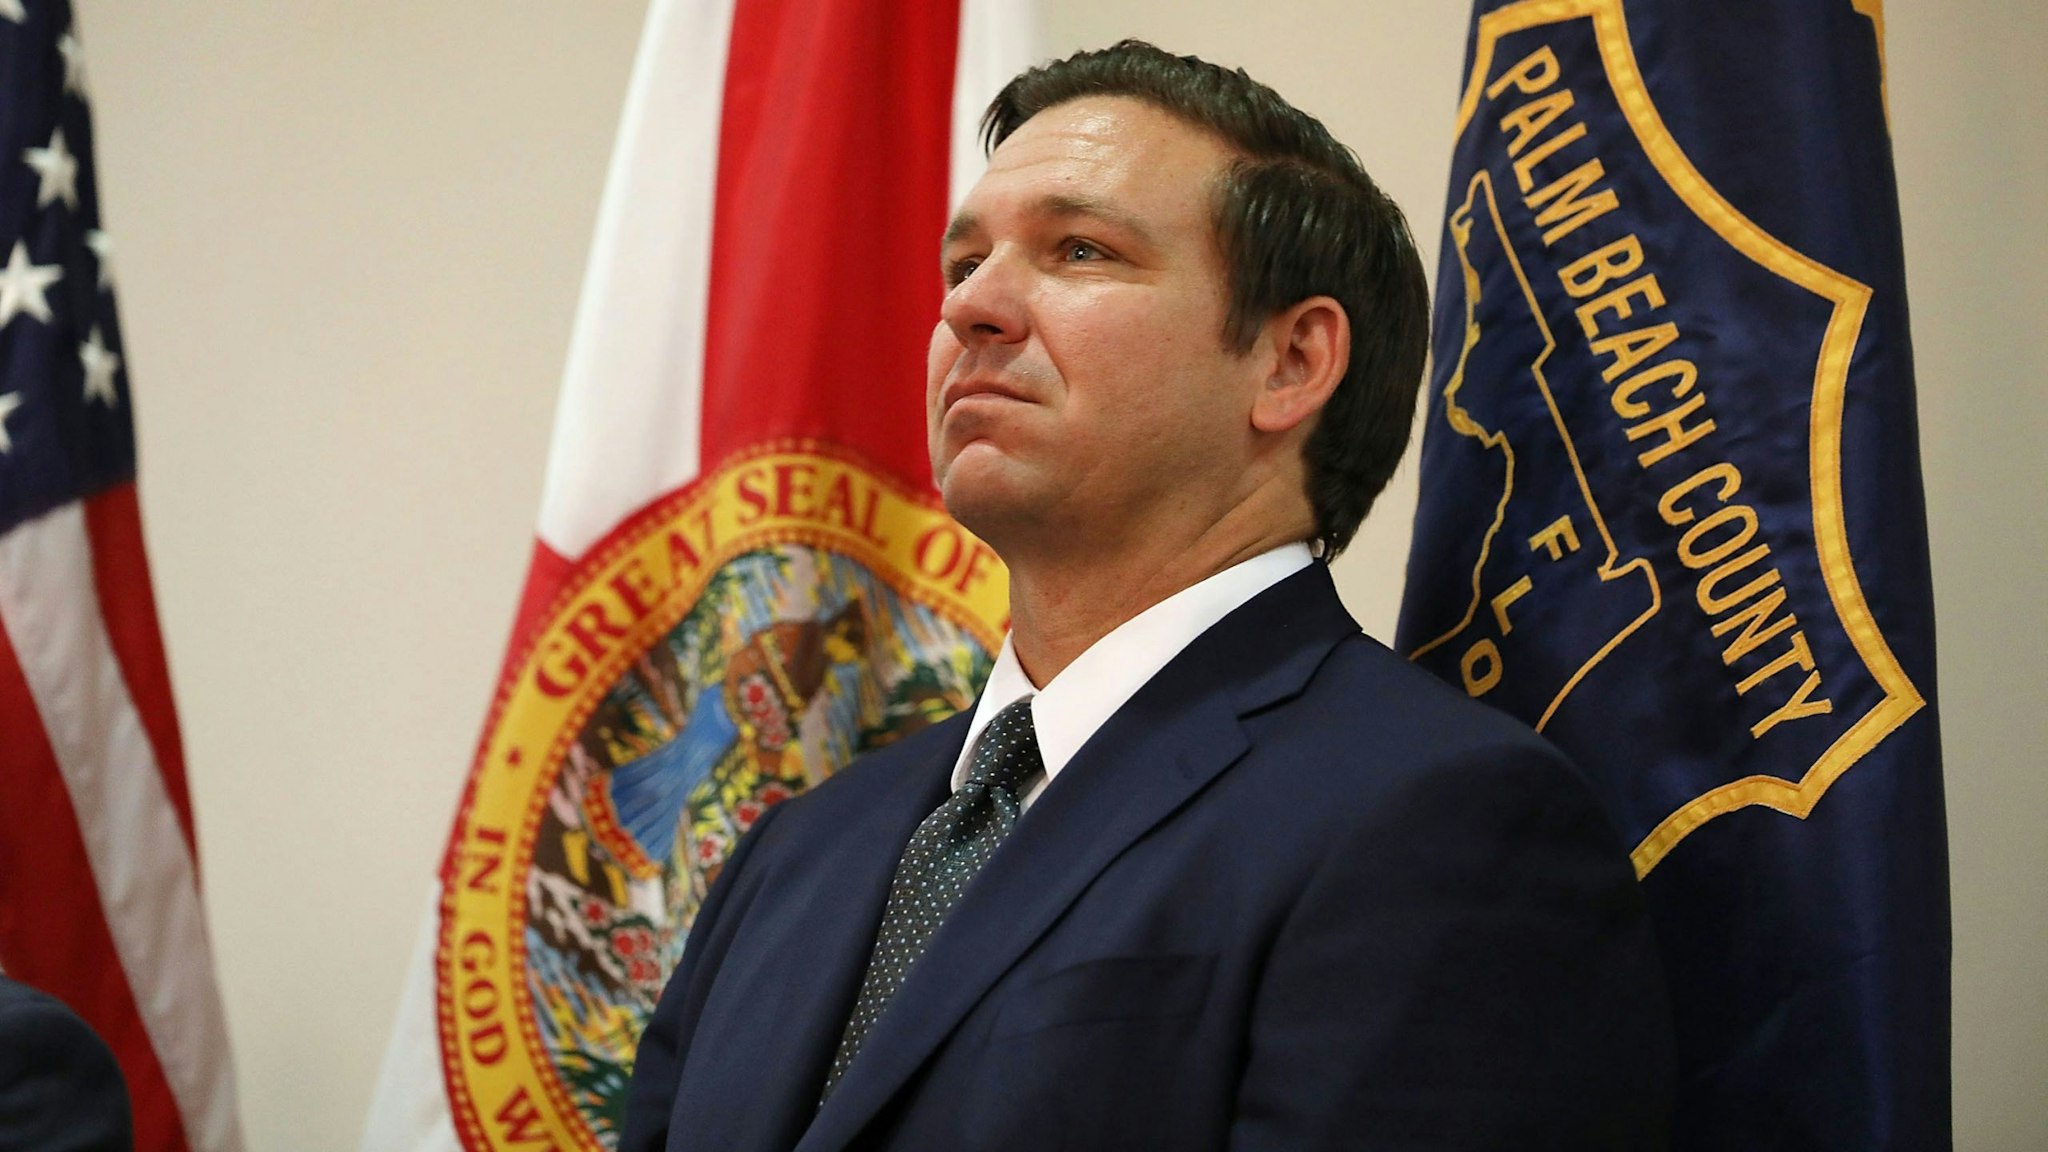 WEST PALM BEACH, FL - OCTOBER 03: Republican candidate for Florida governor Ron DeSantis waits to be introduced during an event put on by the Police Benevolent Association in Palm Beach County on October 3, 2018 in West Palm Beach, Florida. DeSantis is facing off against Democratic challenger Andrew Gillum to be the next Florida governor.